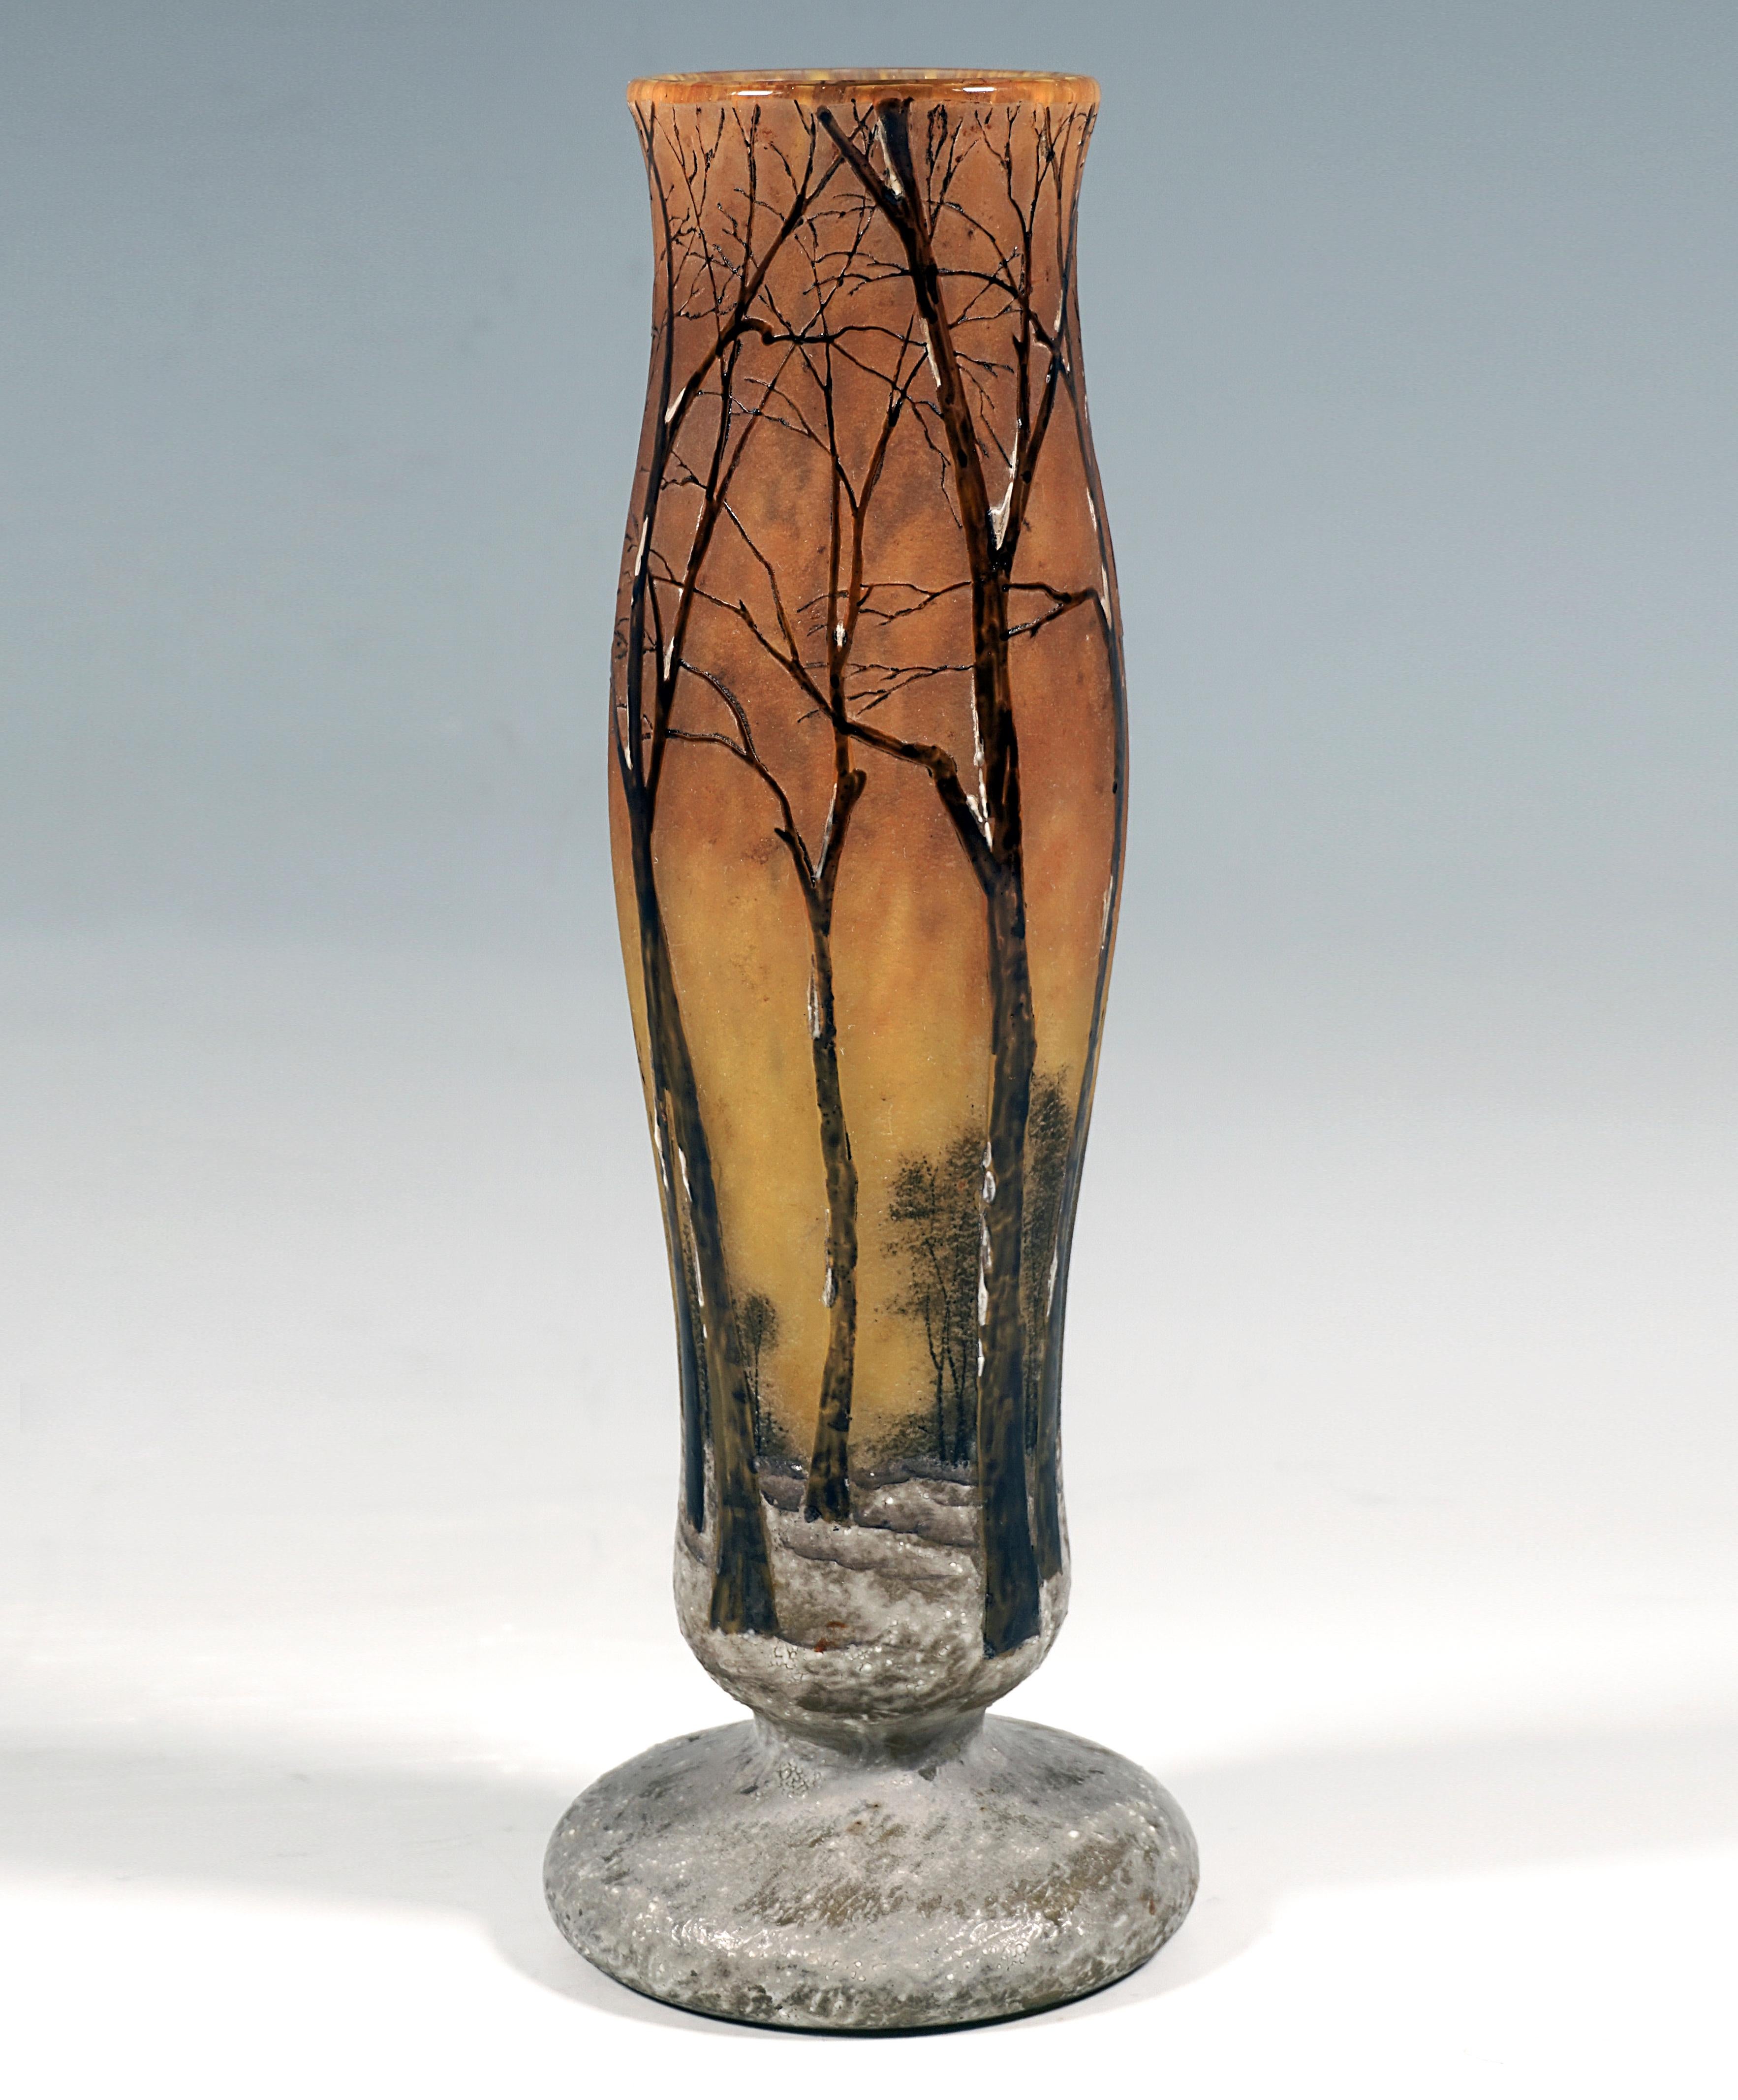 Slender baluster vase on a separate base, colorless glass with flaky yellow powder inclusions, overlay in brownish orange and yellow, in the lower area in gray and white, winter landscape etched in several stages and finely painted with colored